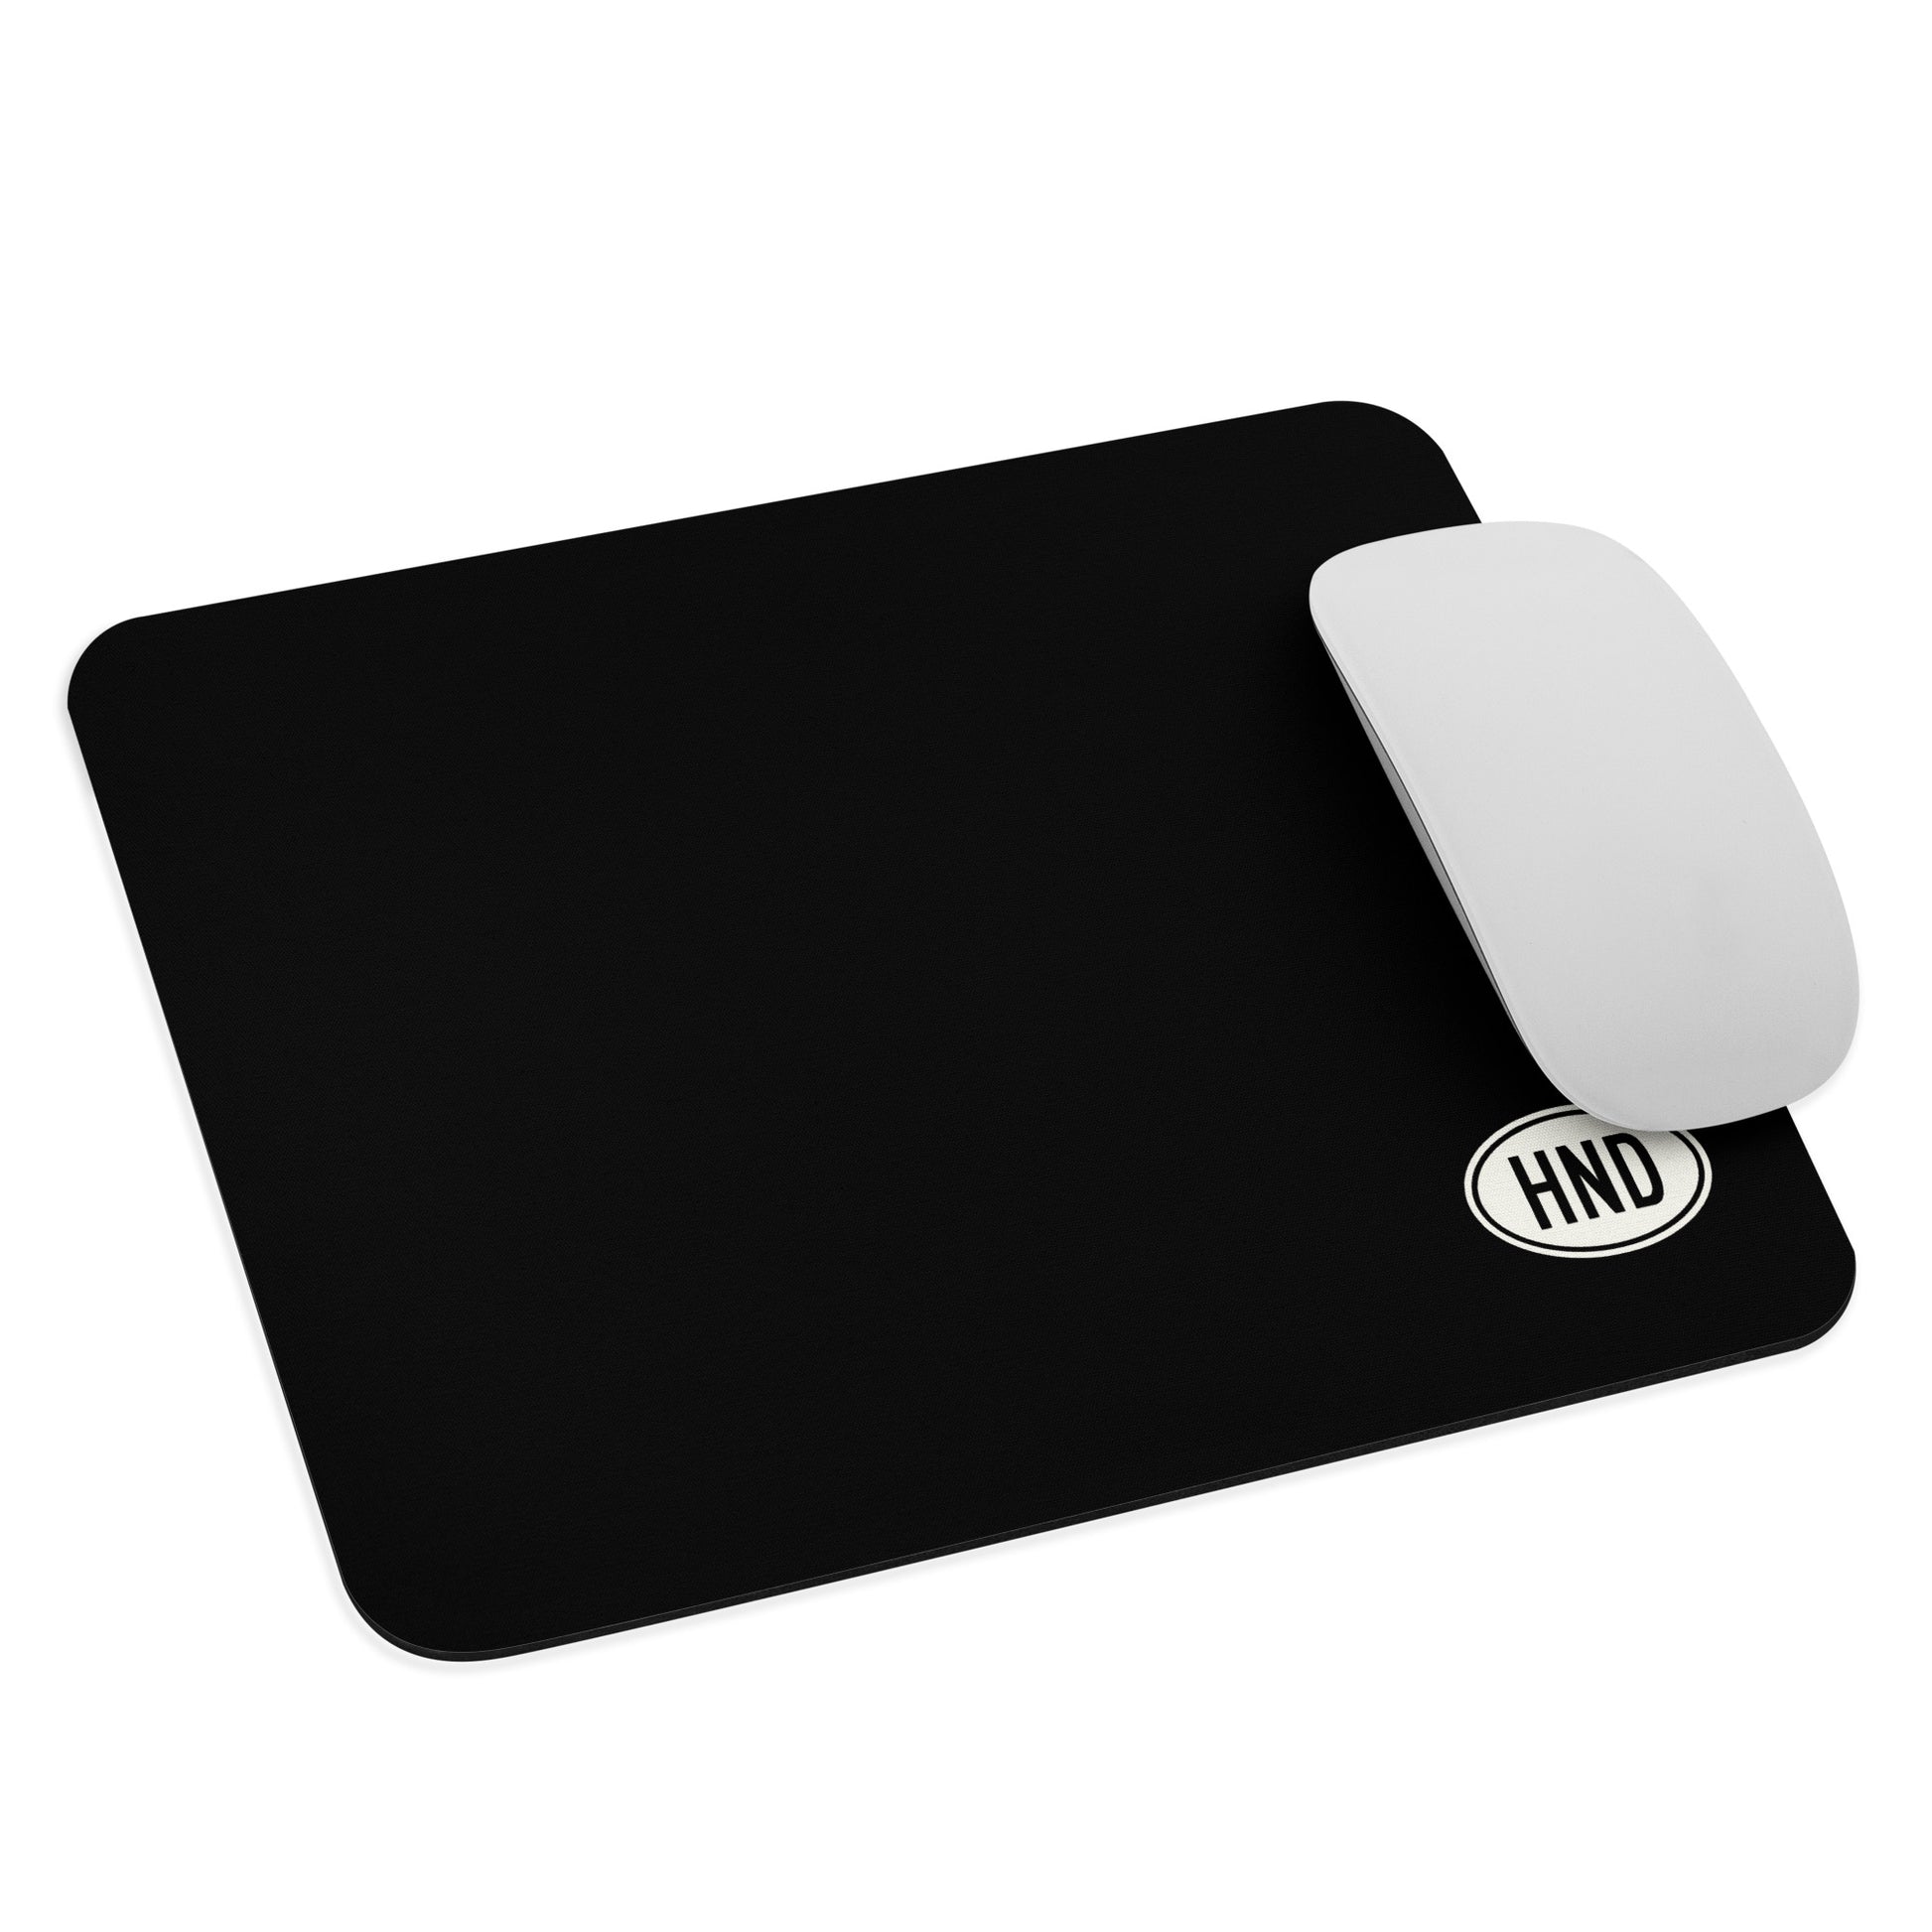 Unique Travel Gift Mouse Pad - White Oval • HND Tokyo • YHM Designs - Image 03